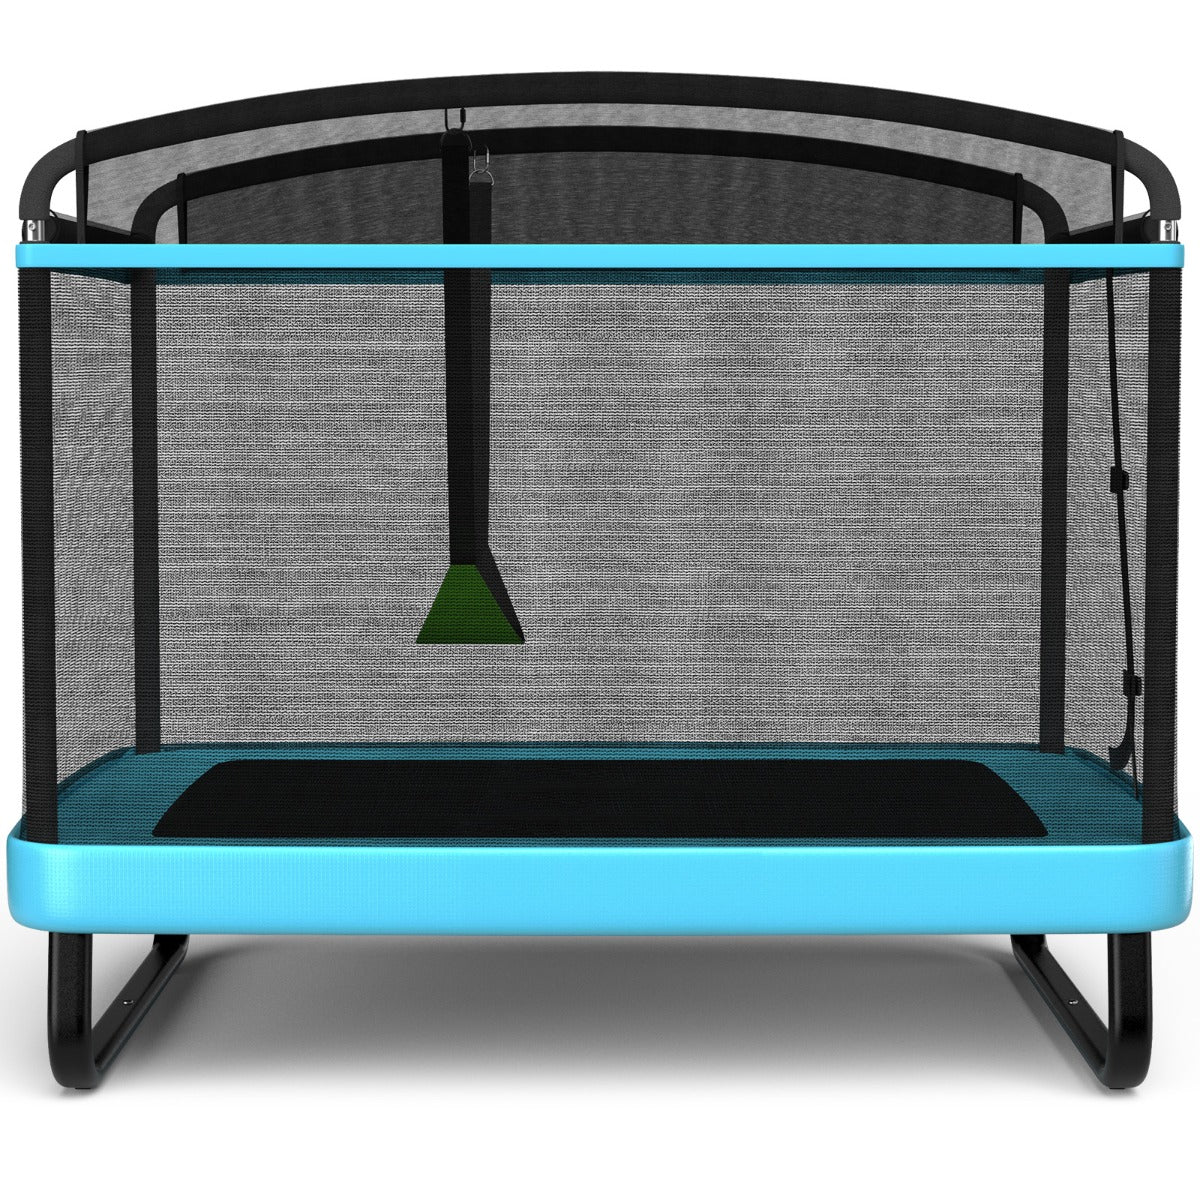 Outdoor Adventure: Sturdy Recreational Trampoline with Swing for Kids Blue